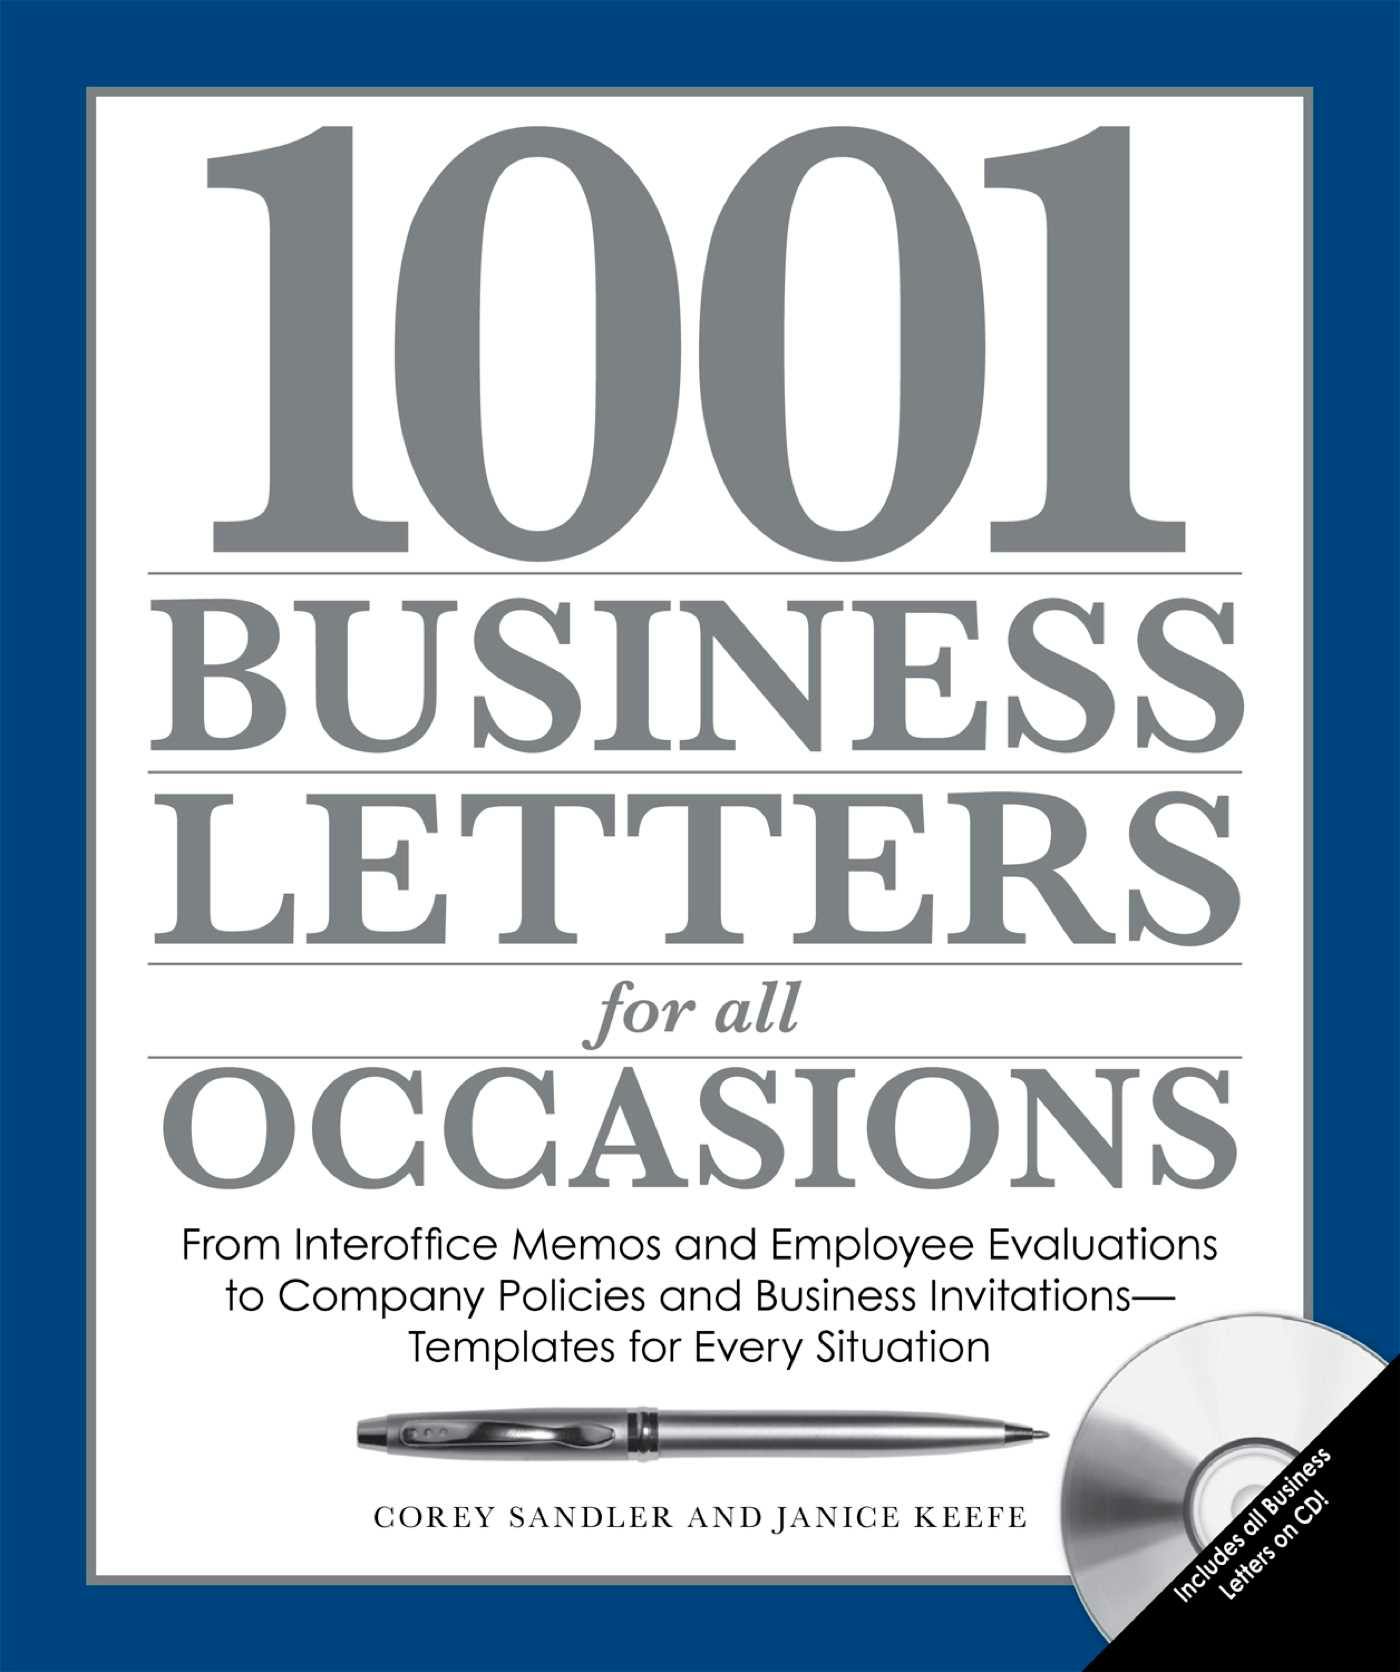 1001 Business Letters for All Occasions: From Interoffice Memos and Employee Evaluations to Company Policies and Business Invitations - Templates for Every Situation - undefined